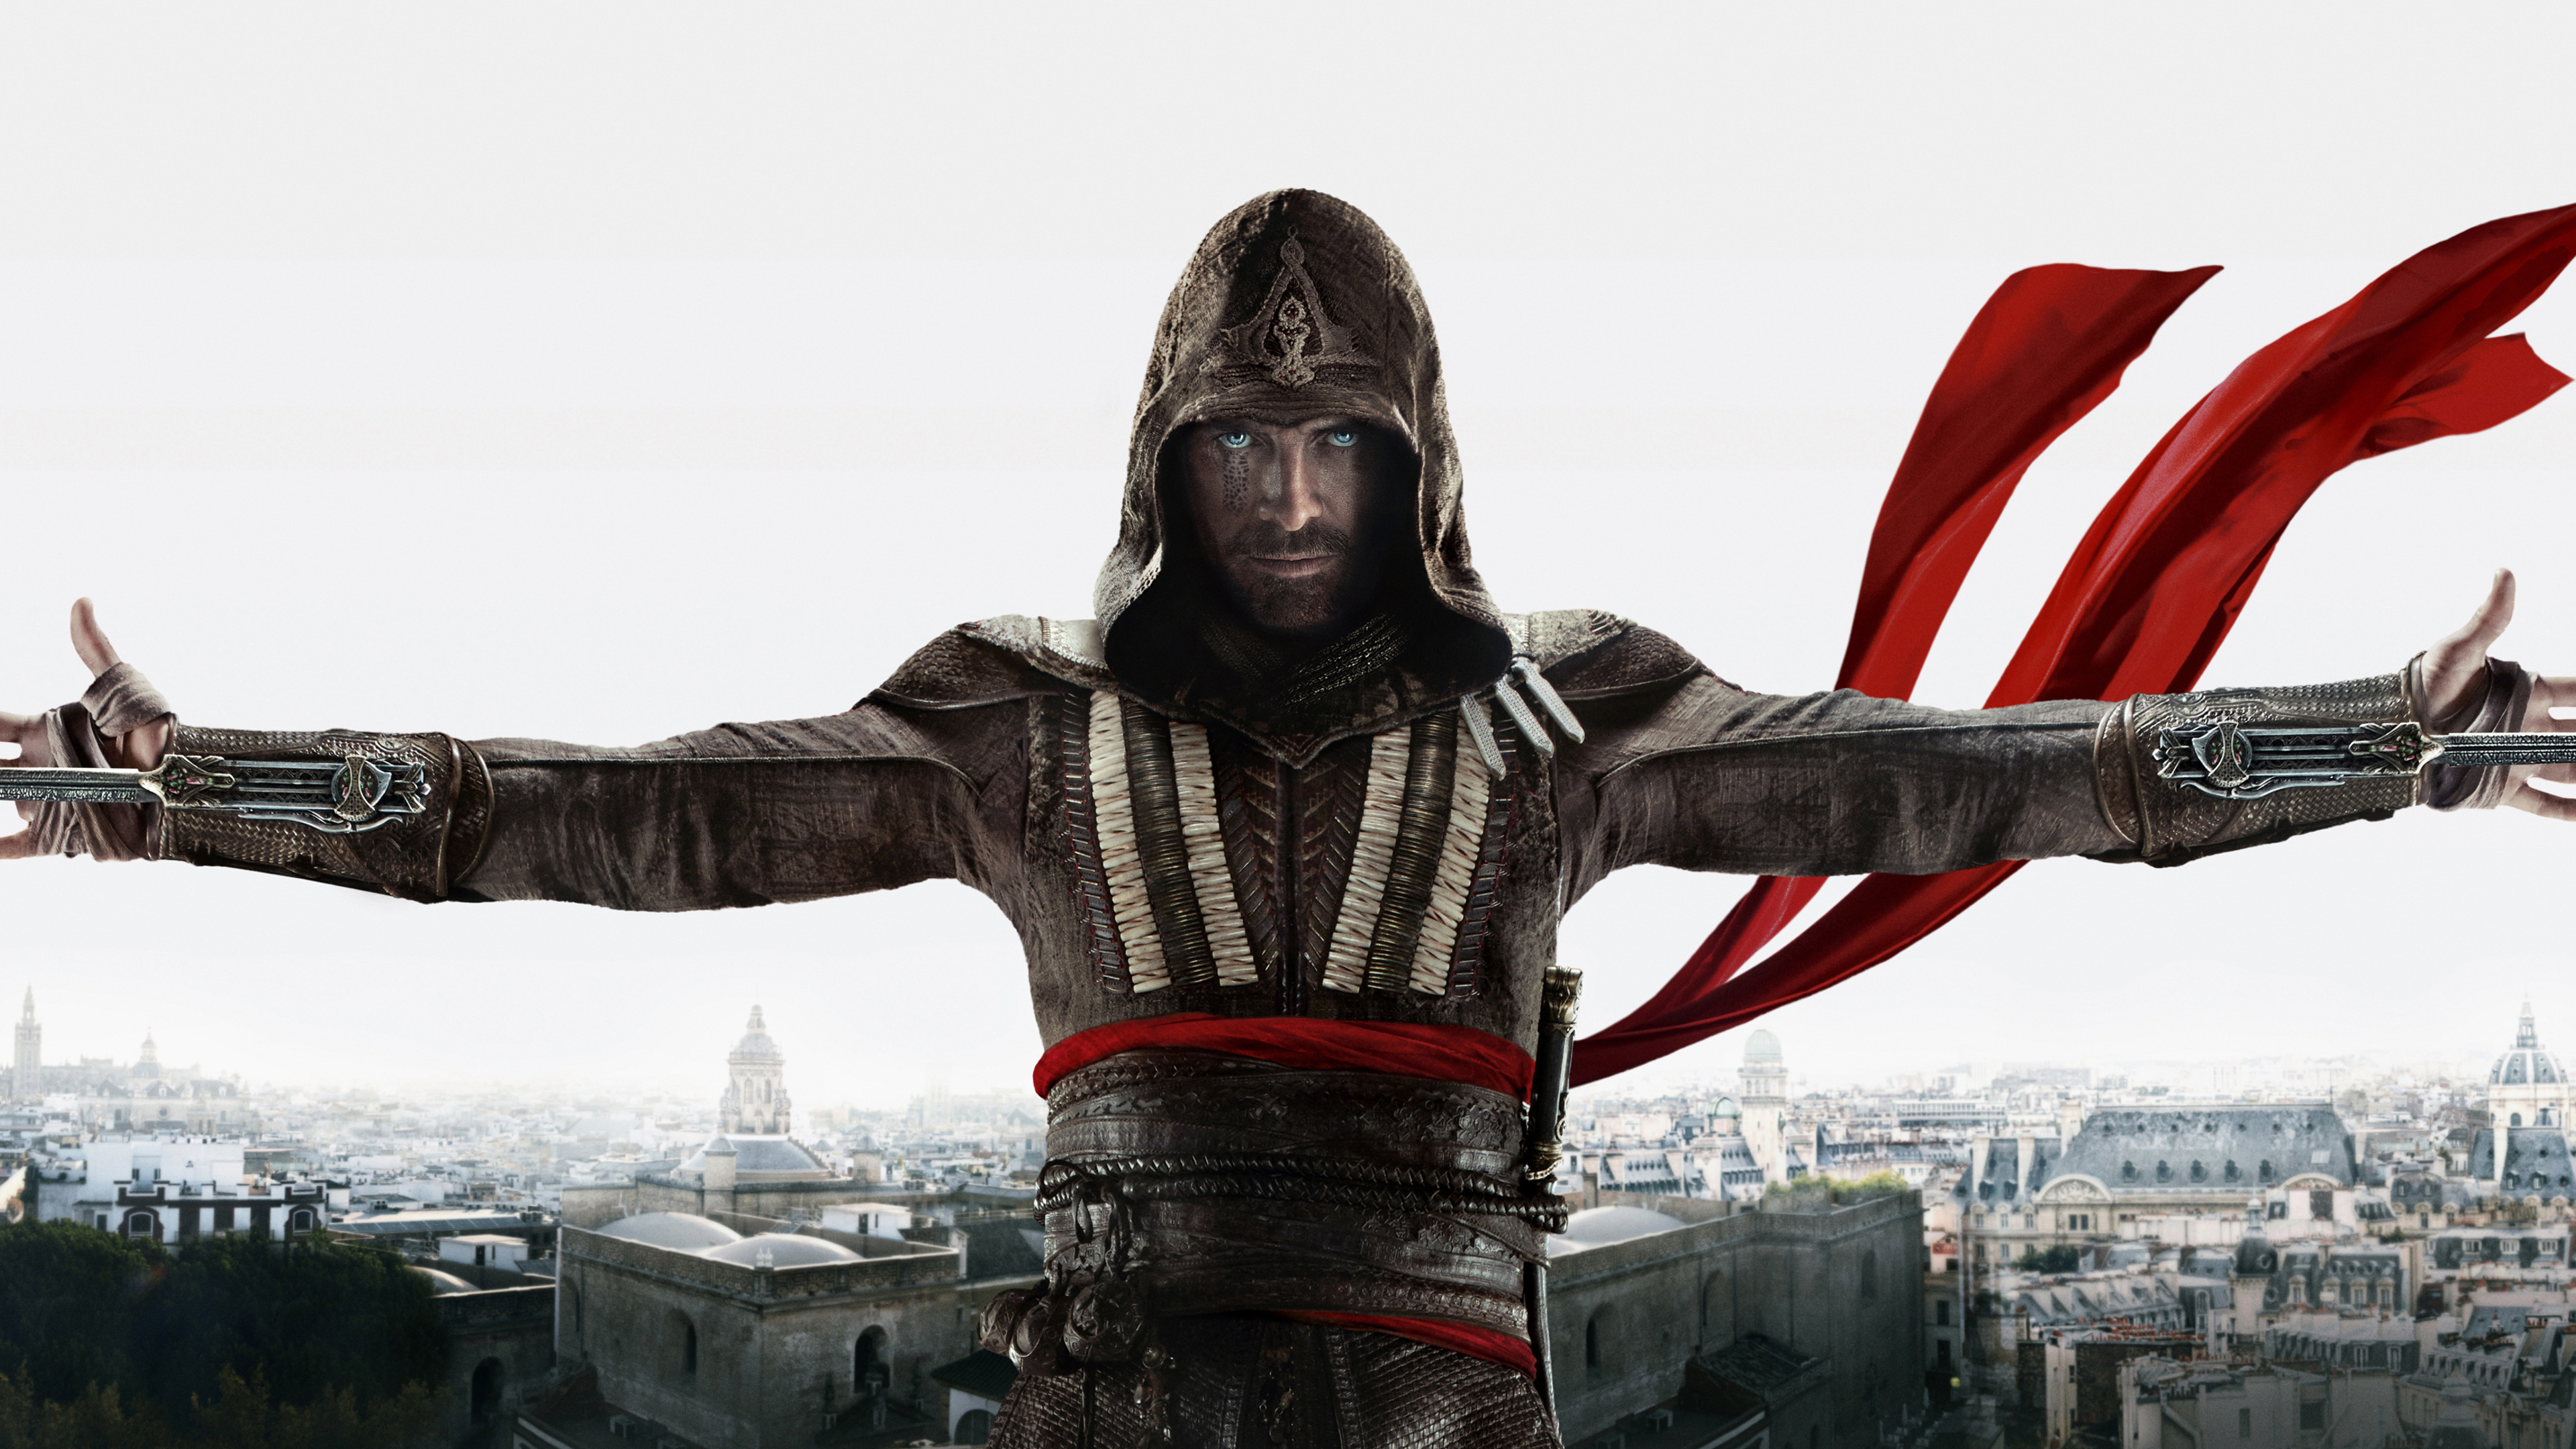 assassins creed movie 4k 1536400510 - Assassins Creed Movie 4k - movies wallpapers, michael fassbender wallpapers, assassins creed wallpapers, assassins creed movie wallpapers, 4k-wallpapers, 2016 movies wallpapers